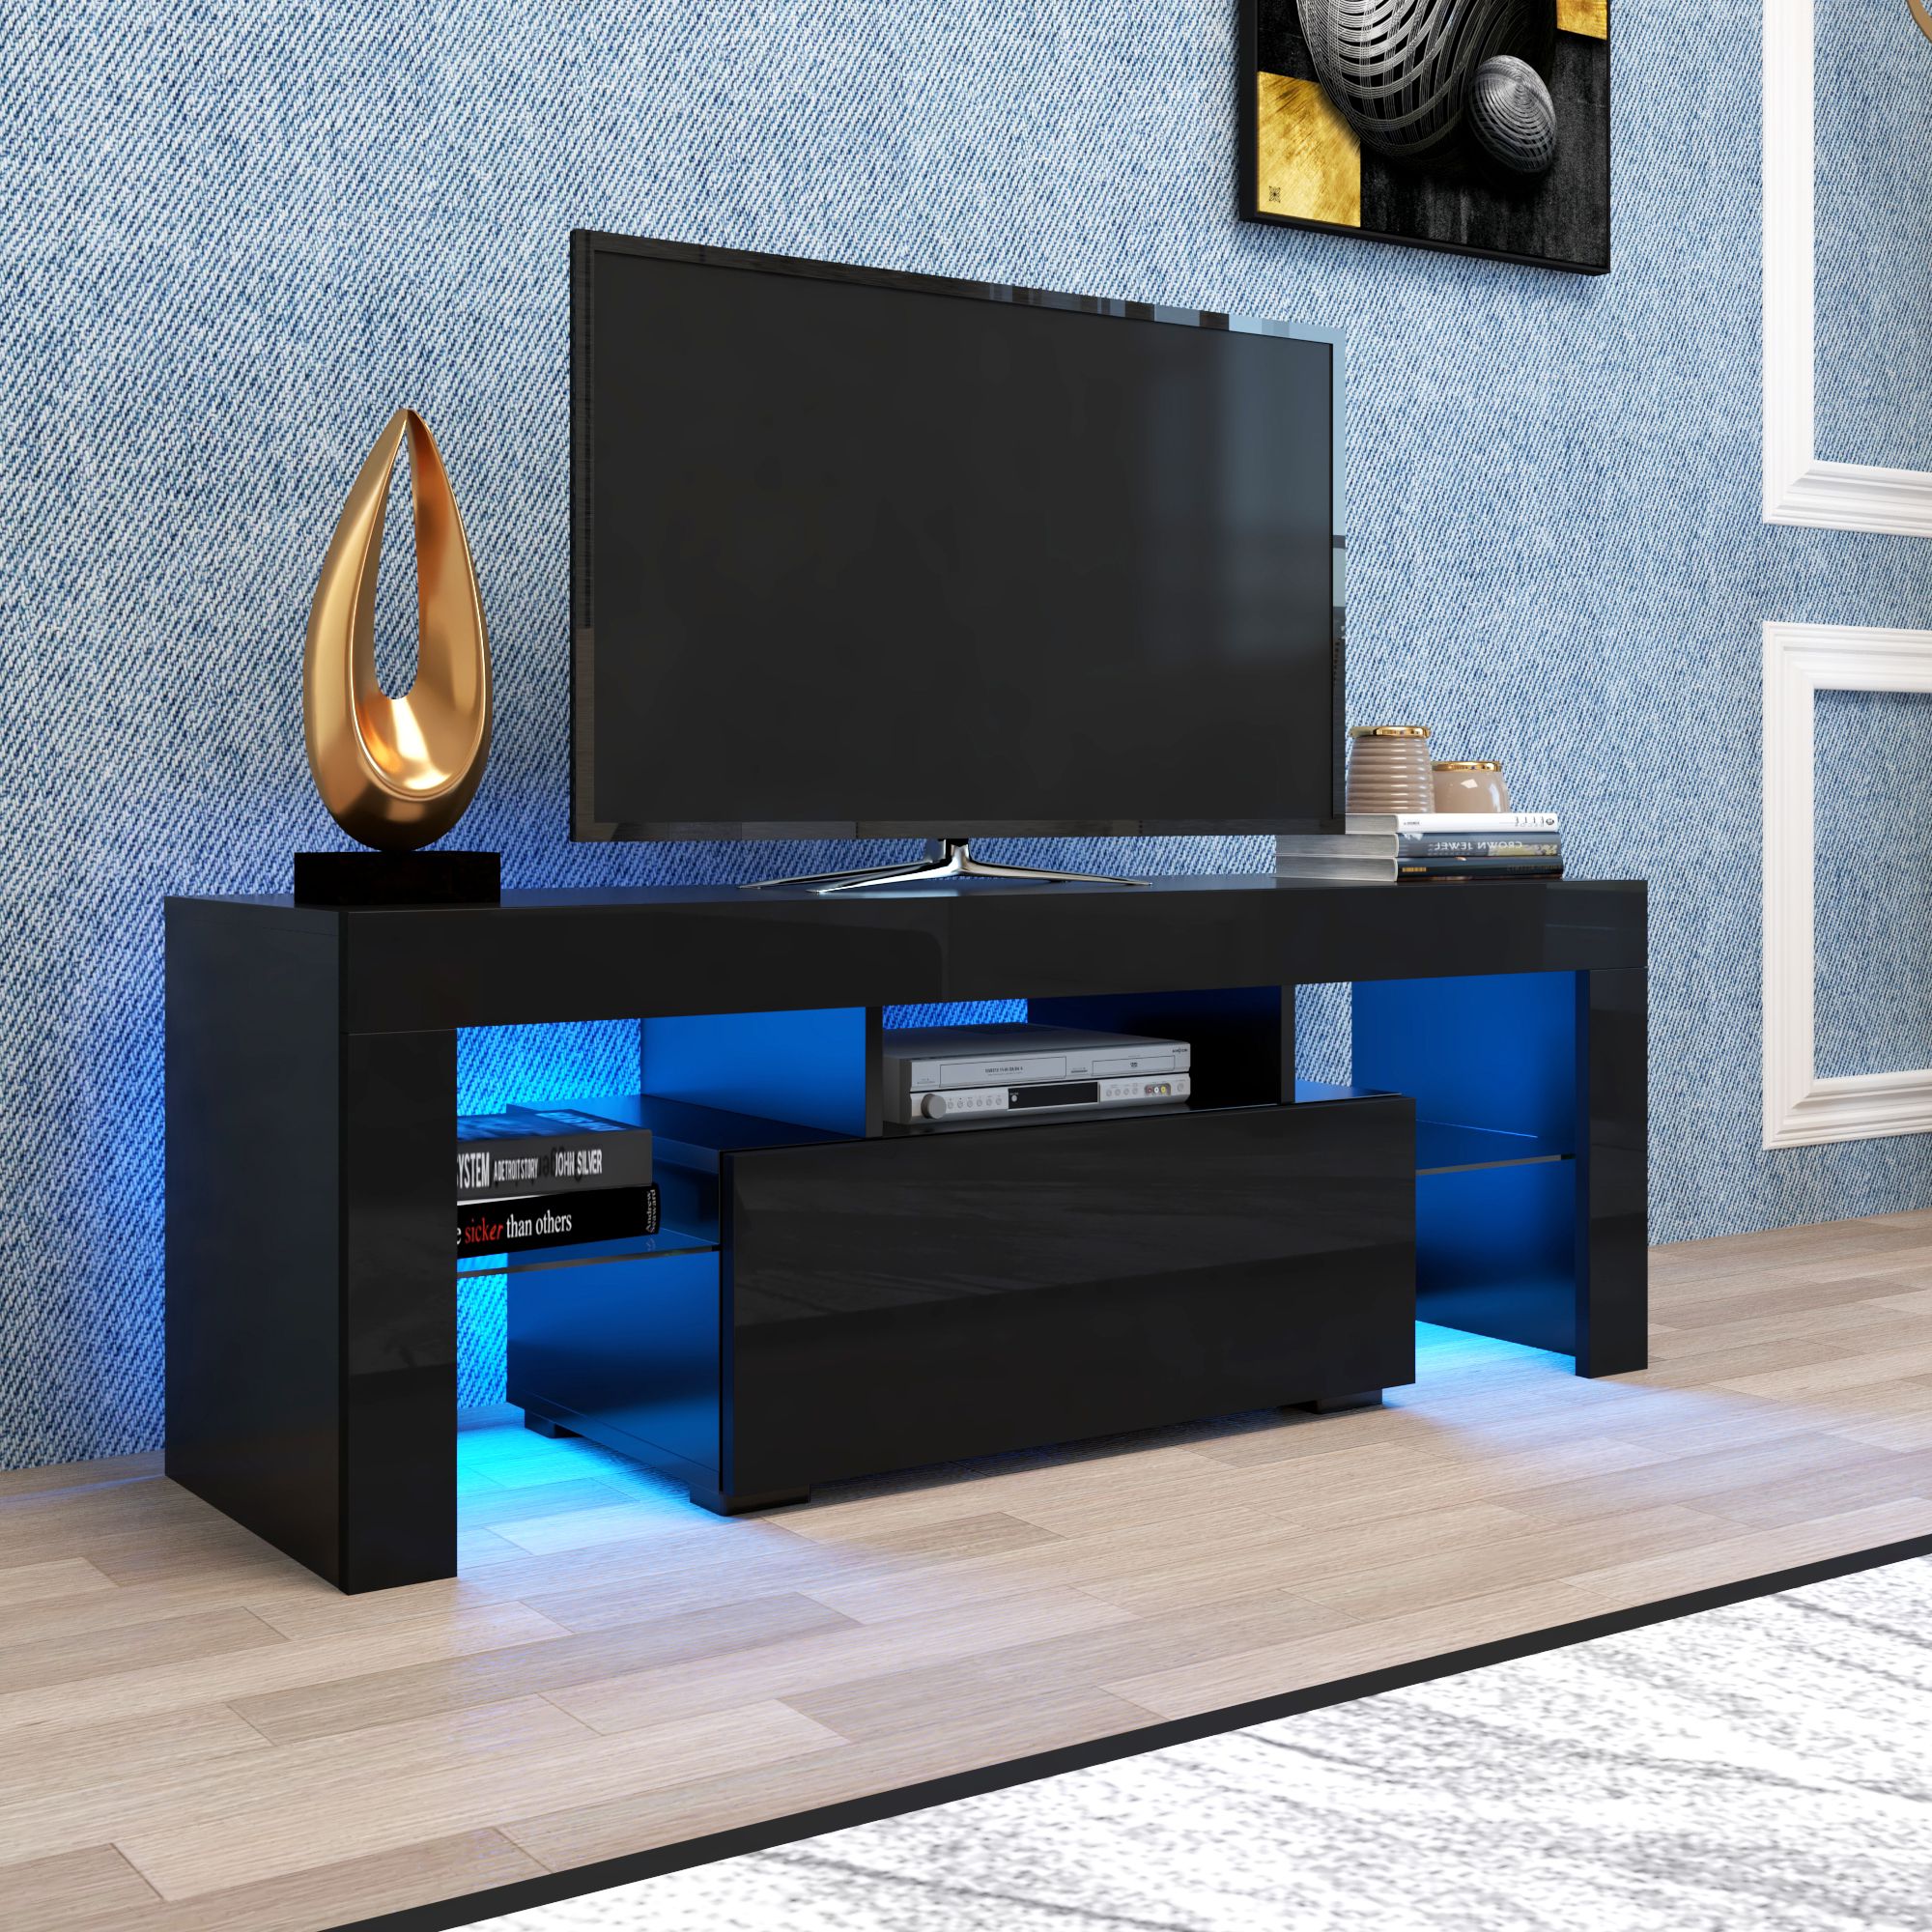 Widely Used Glass Shelves Tv Stands For Tvs Up To 65" Throughout Black Tv Stand For Up To 65 Inch Tv, Yofe High Gloss Tv (Photo 3 of 10)